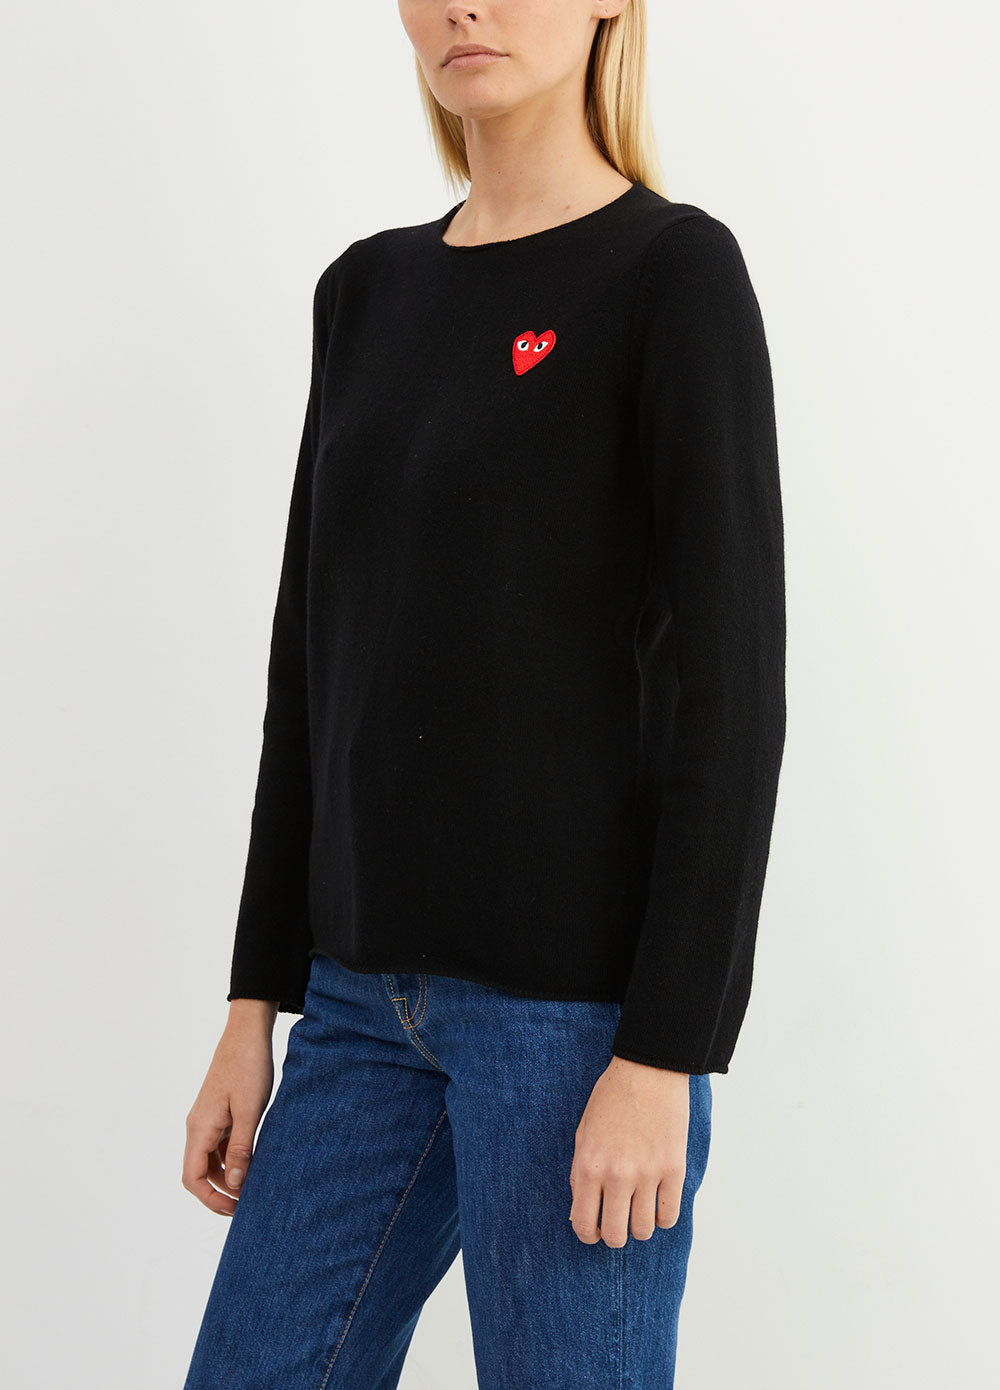 N067 Red Heart Sweater